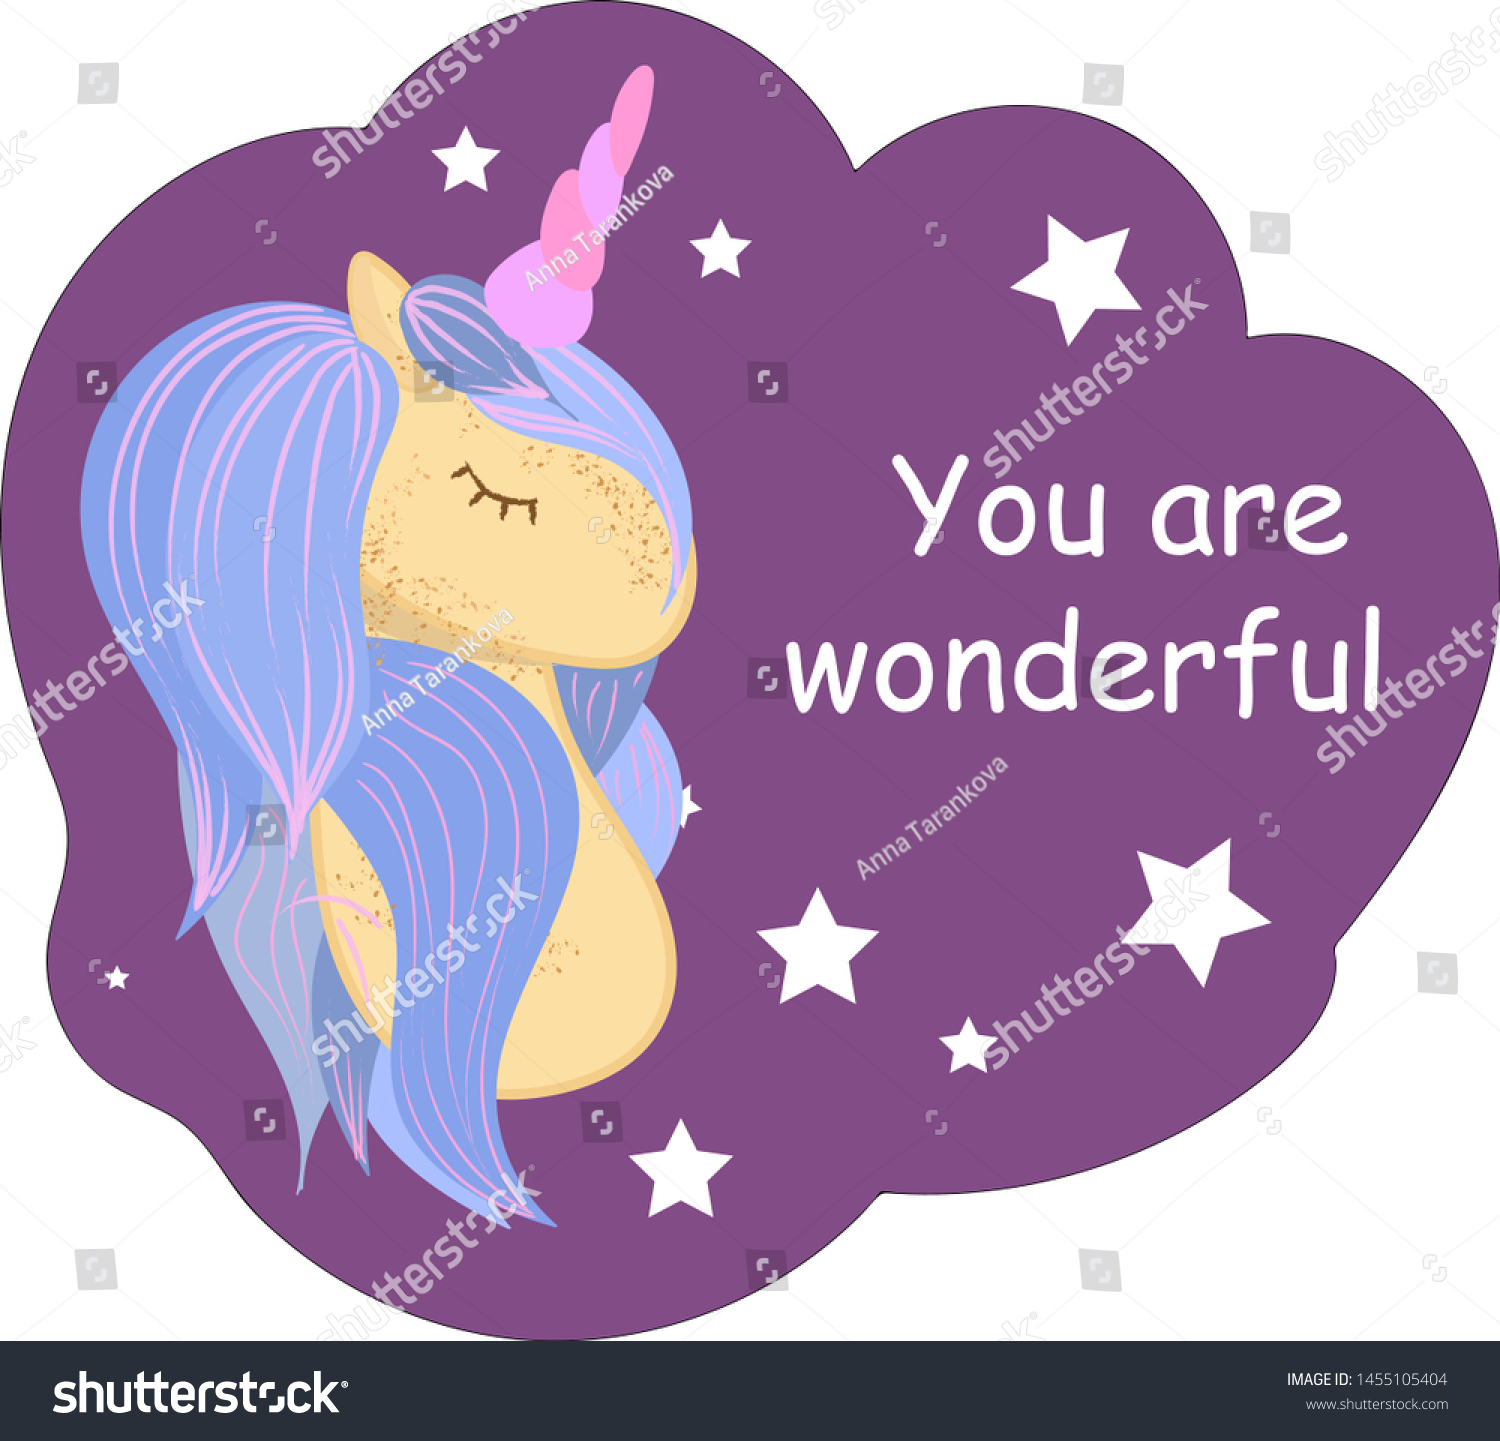 SVG of Magic cute baby unicorn, my little princess quote poster, greeting card, vector illustration with outline for kids print clothing textile and poster svg